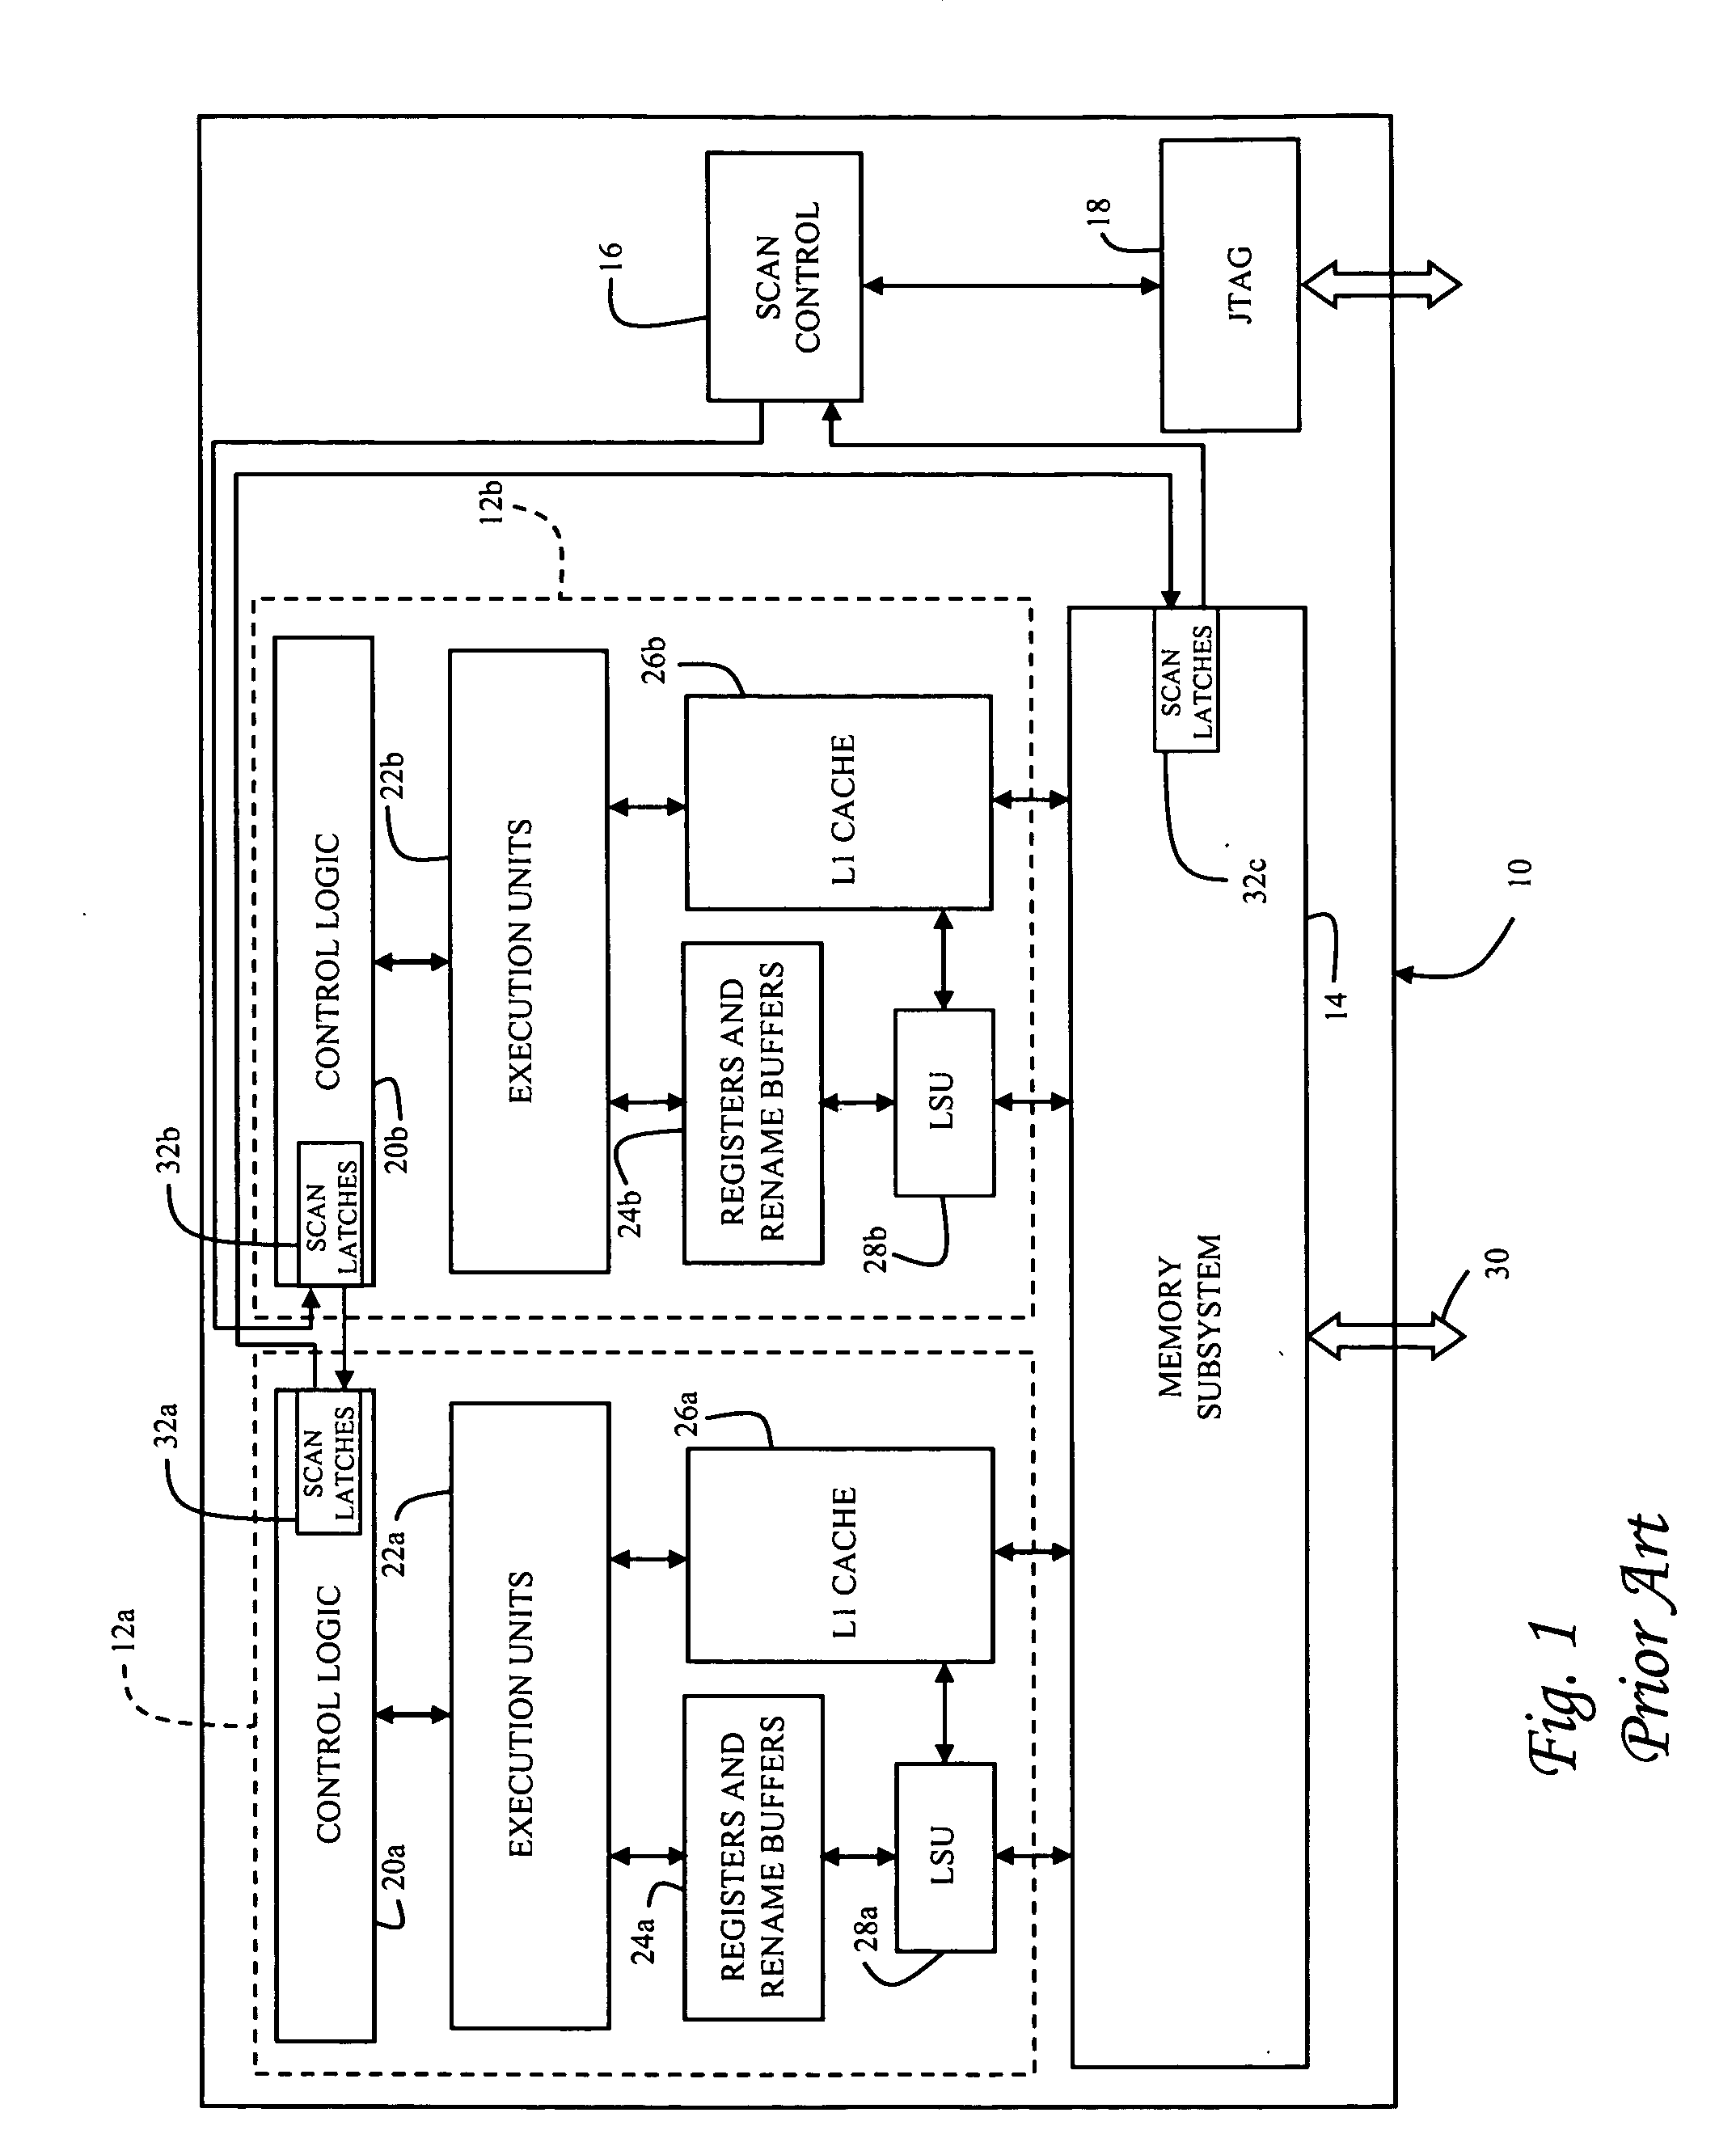 Method and apparatus for soft-error immune and self-correcting latches